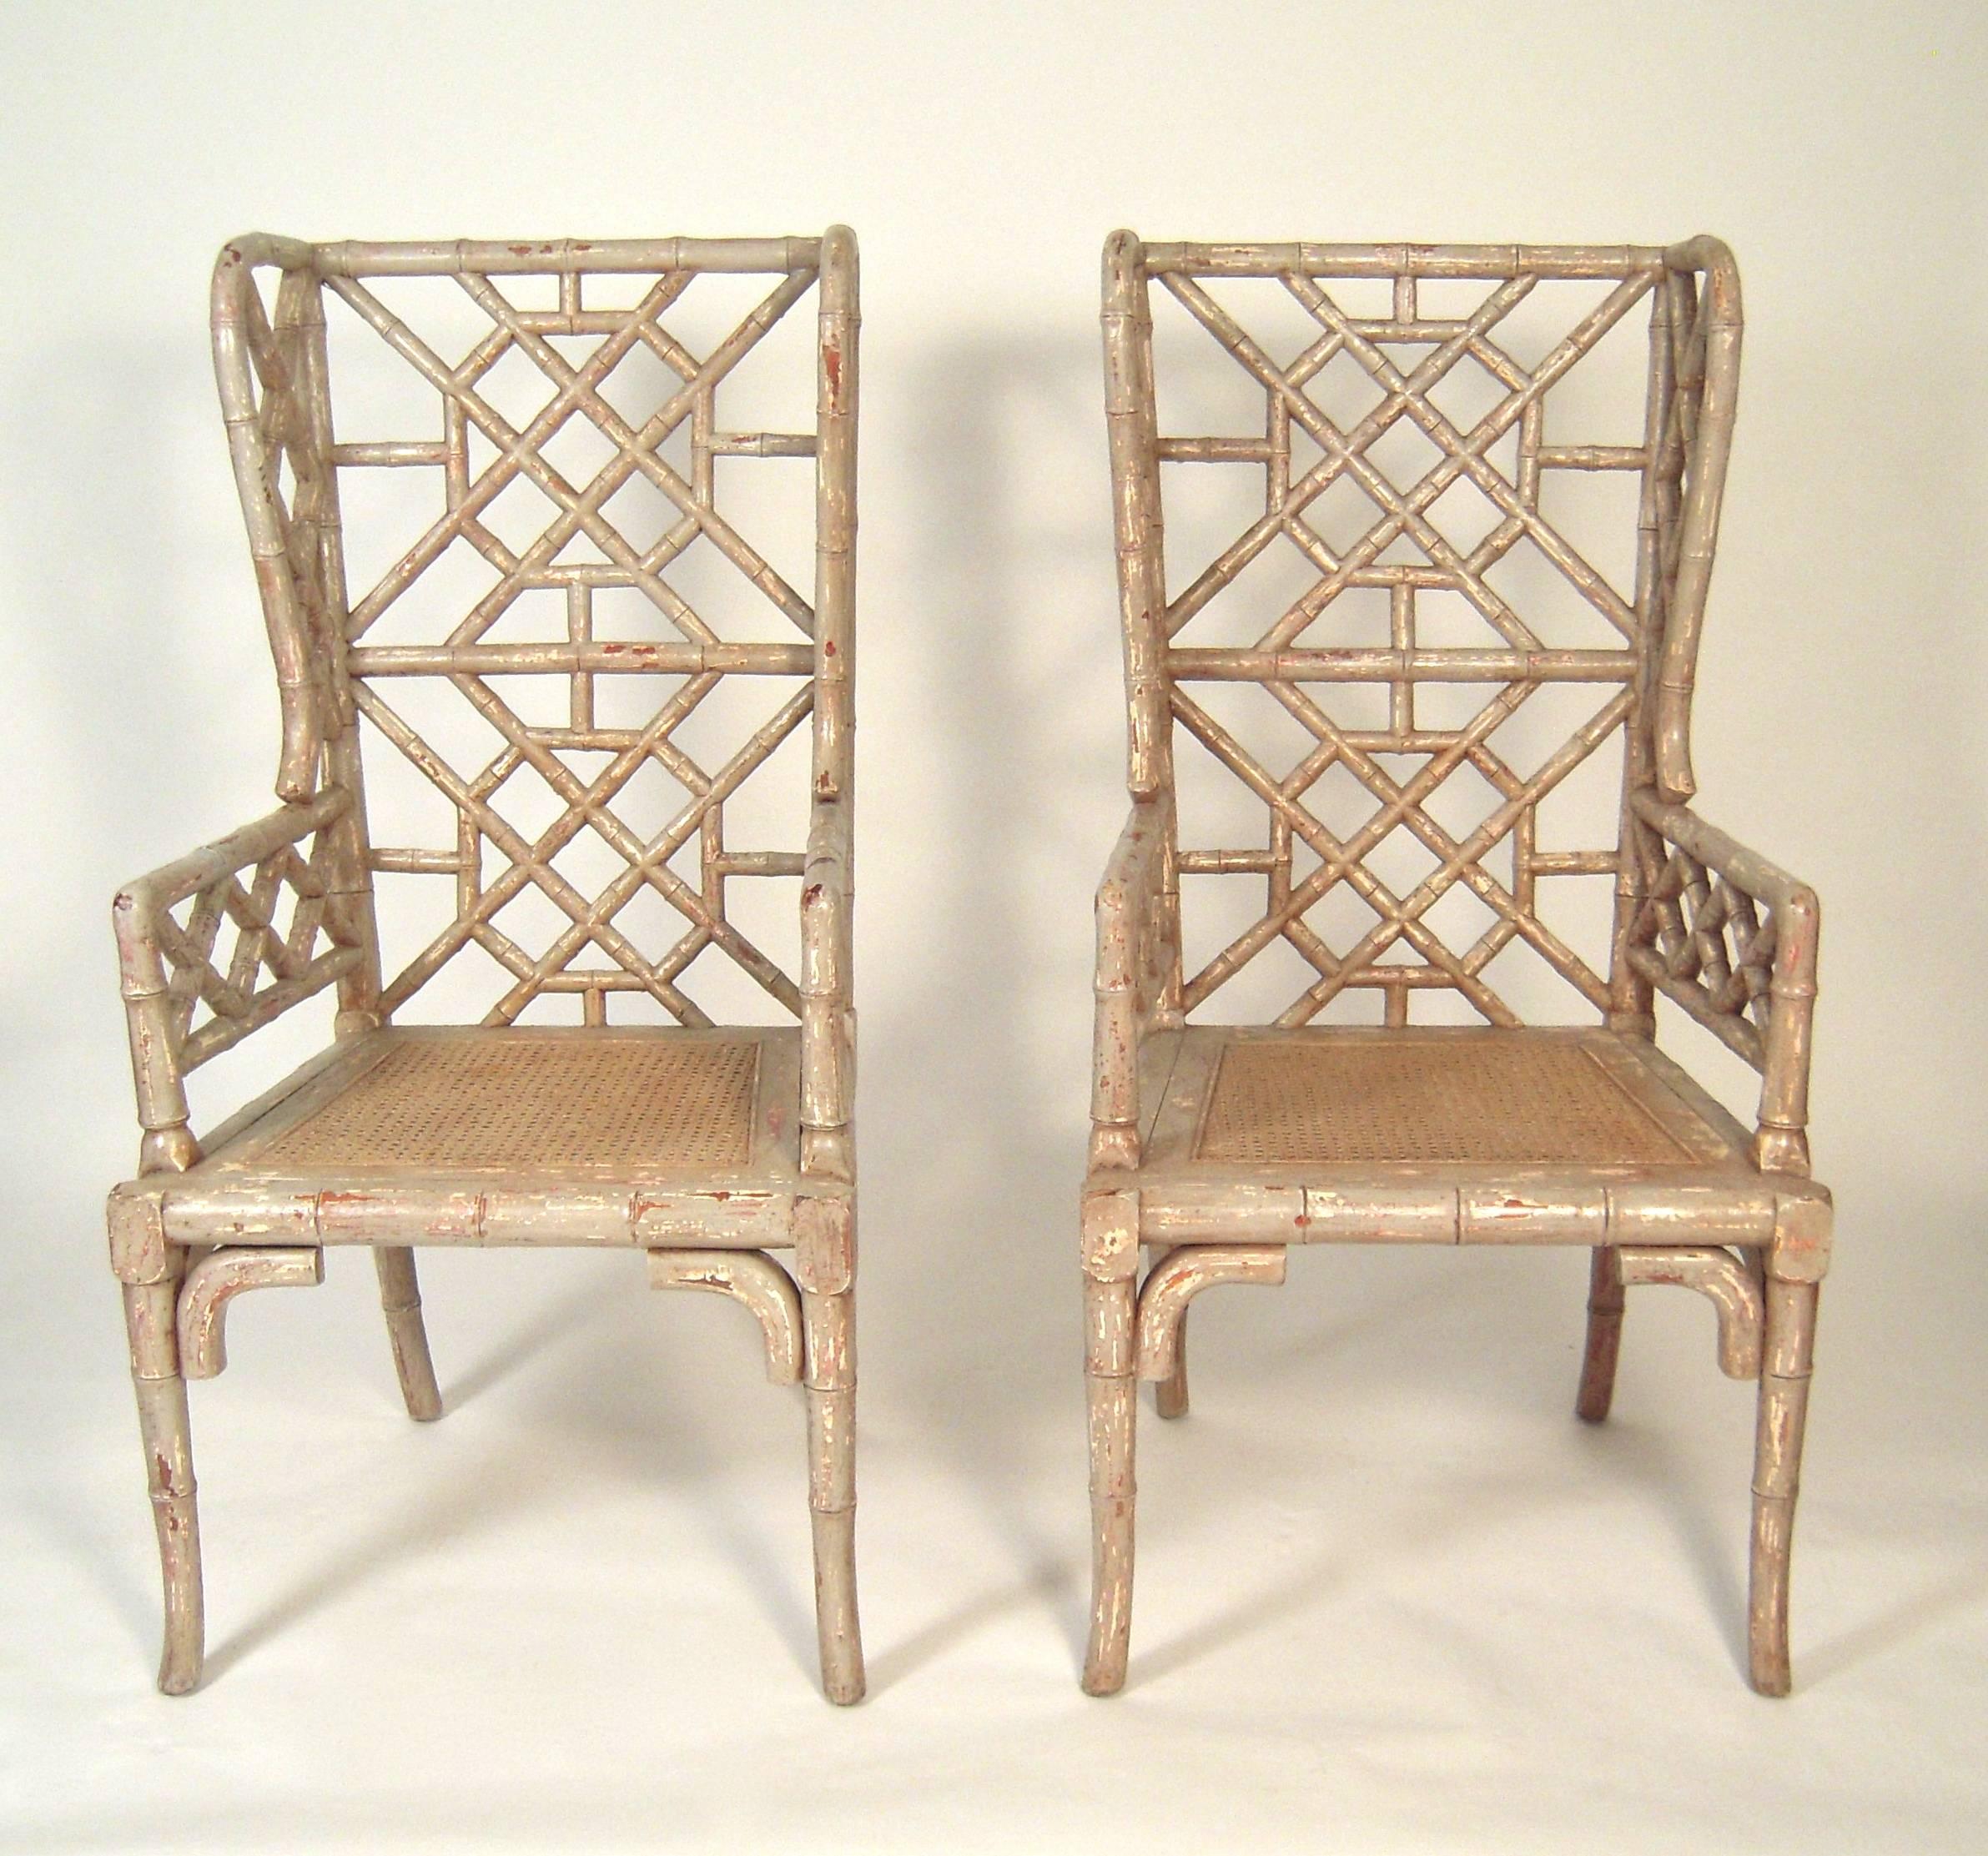 A pair of stylish chinoiserie faux bamboo wing chairs, beautifully crafted of carved wood to resemble bamboo, in a distressed painted finish. Very comfortable.